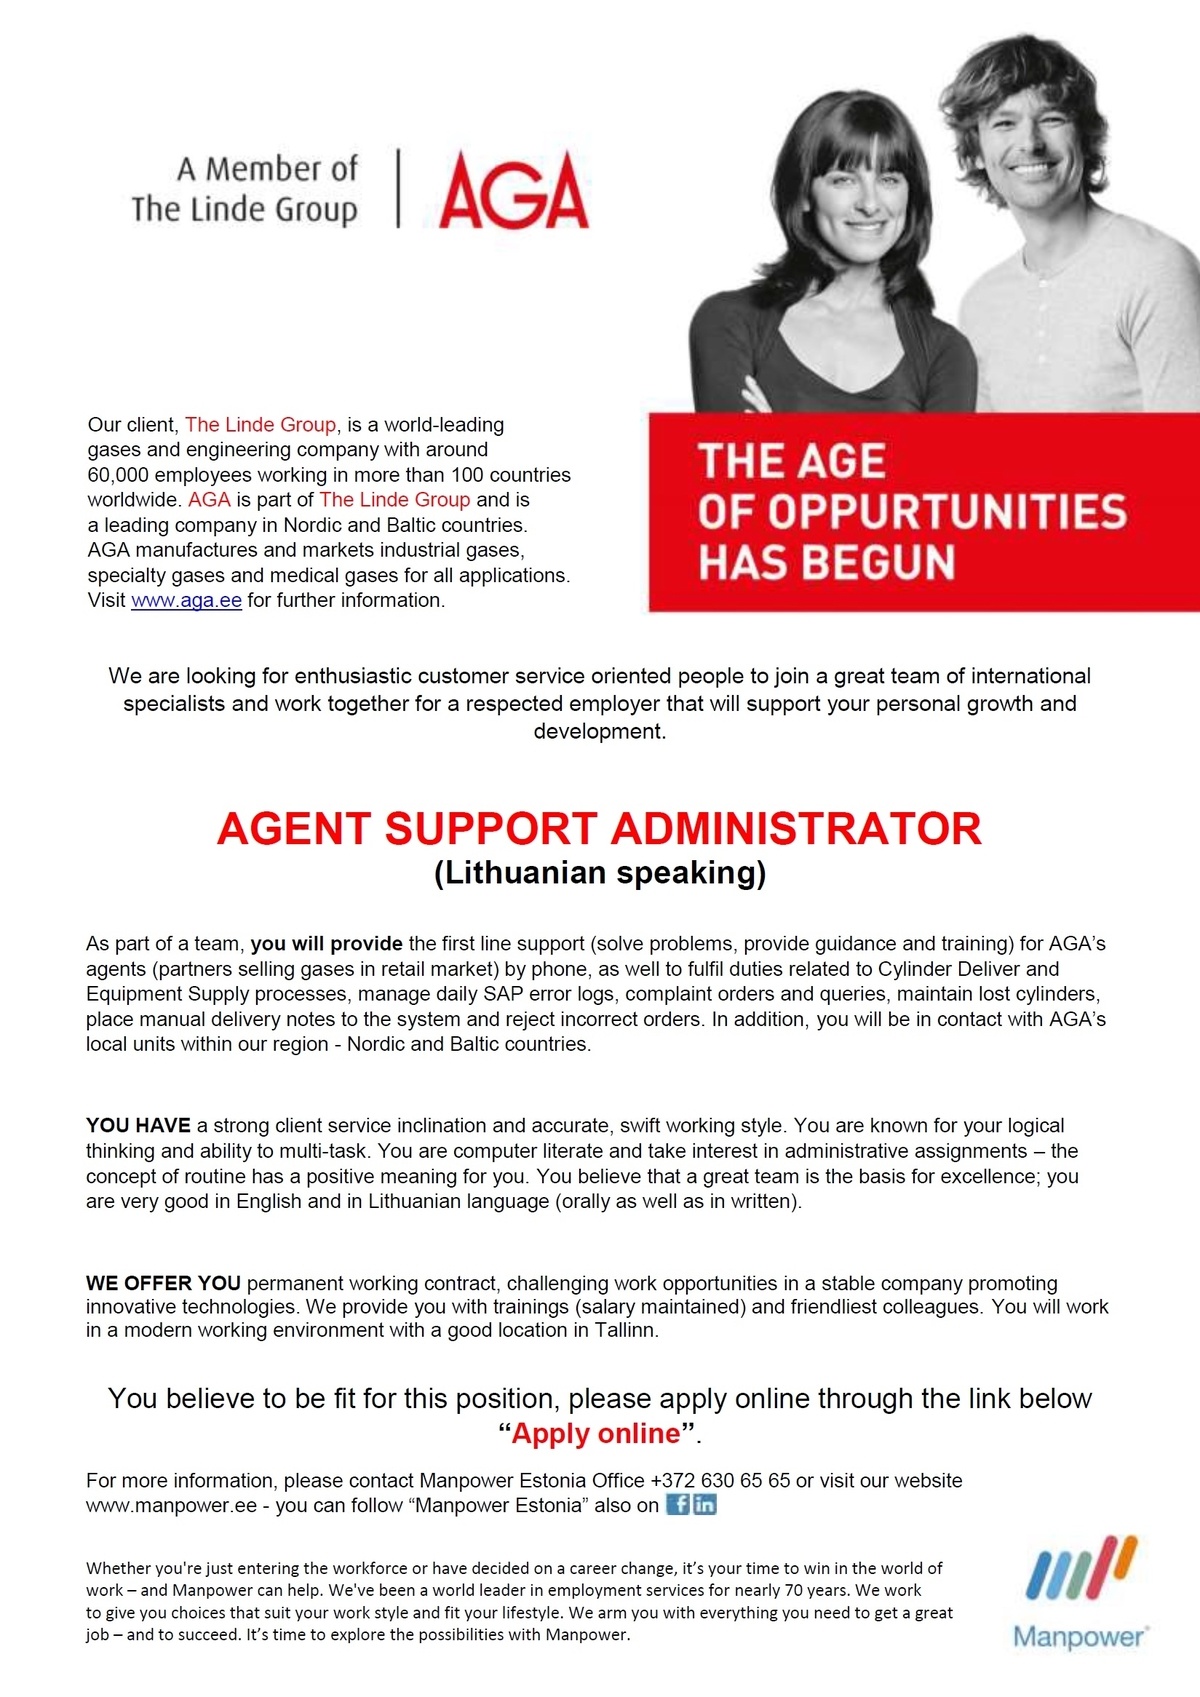 Manpower OÜ AGENT SUPPORT ADMINISTRATOR (Lithuanian speaking)